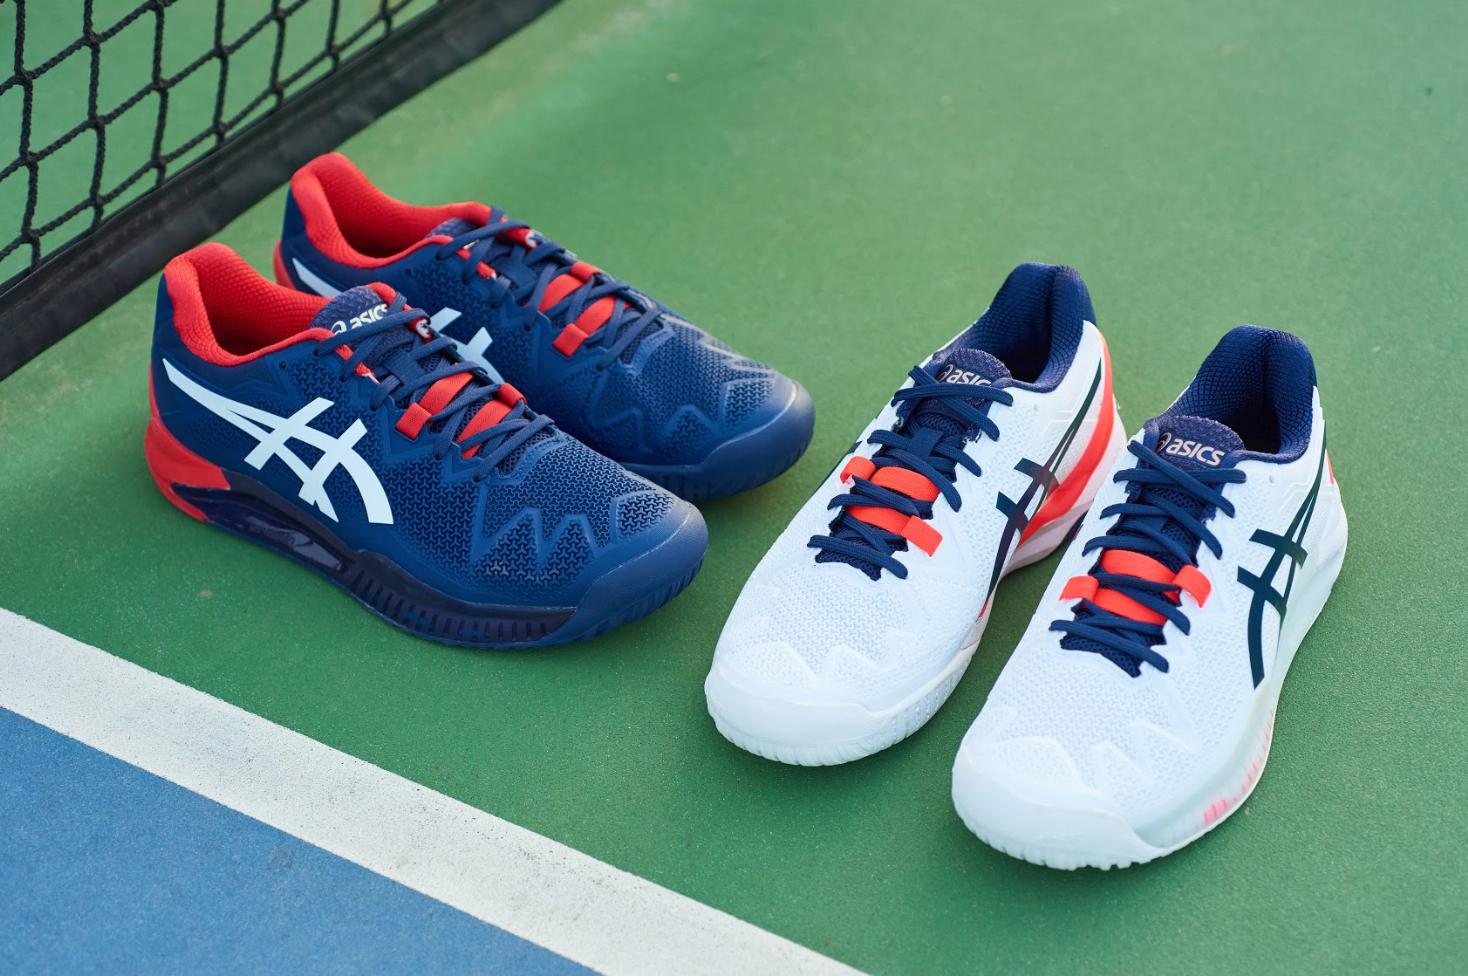 Introducing: ASICS GEL-RESOLUTION™8: High-tech Tennis Shoe for Baseline  Players | Business Wire